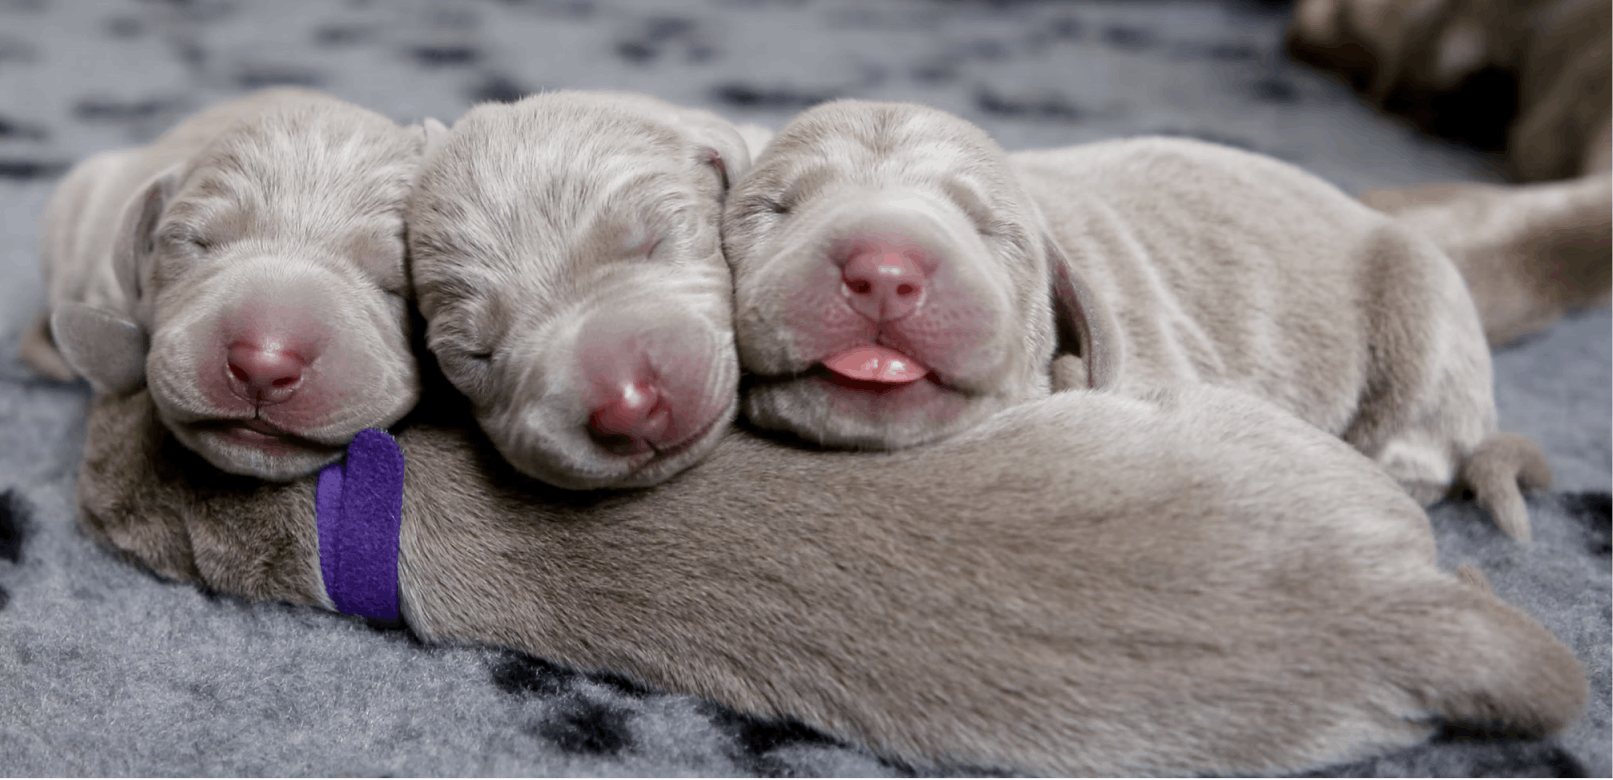 How Long Should A Puppy Stay With Its Mother?